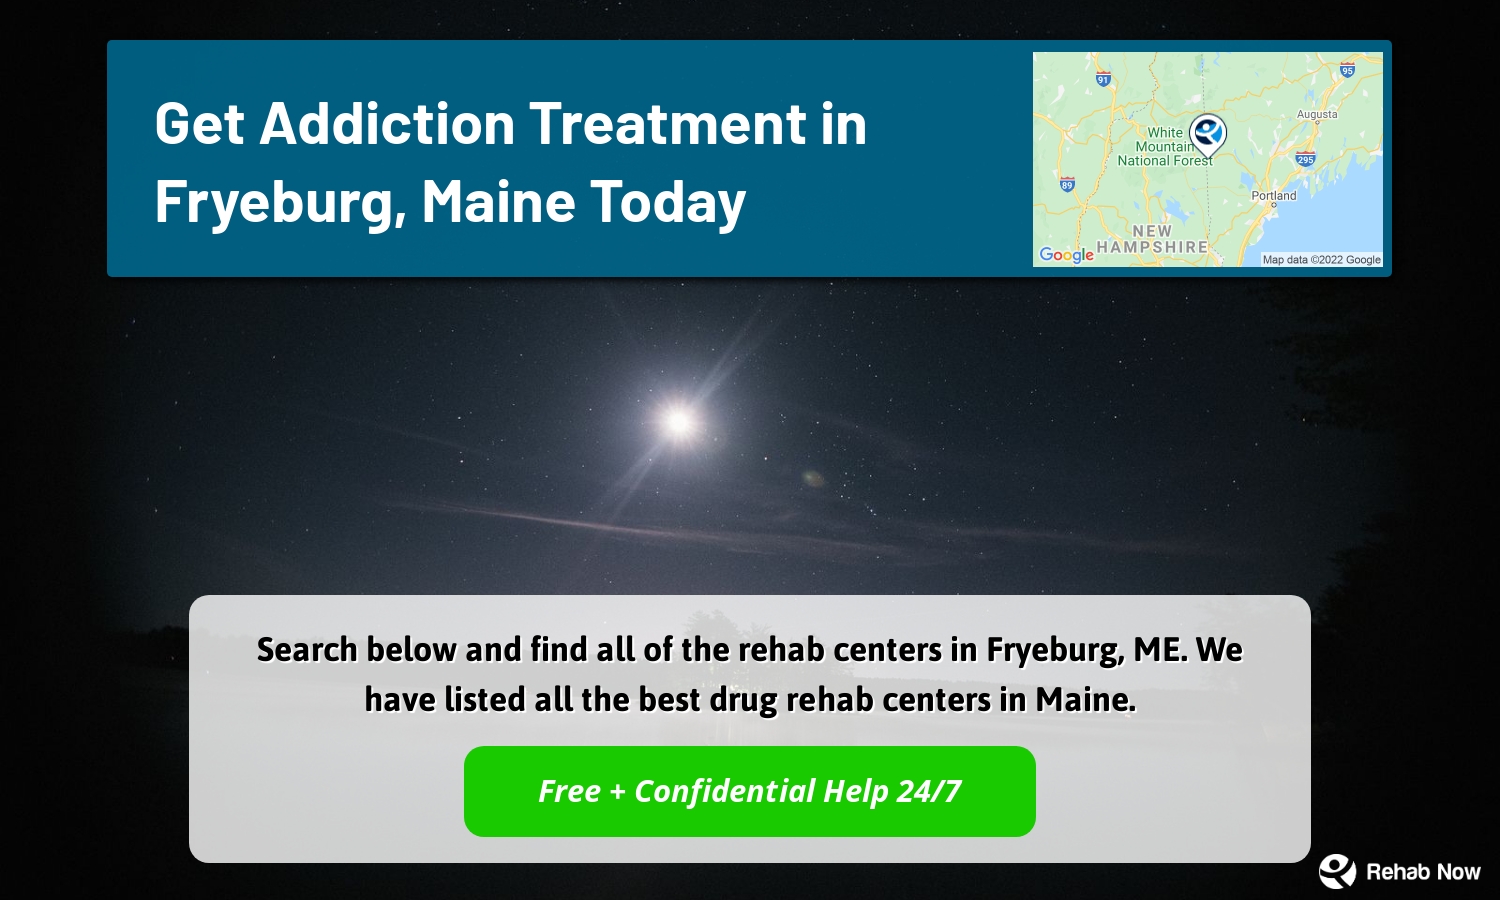 Search below and find all of the rehab centers in Fryeburg, ME. We have listed all the best drug rehab centers in Maine.